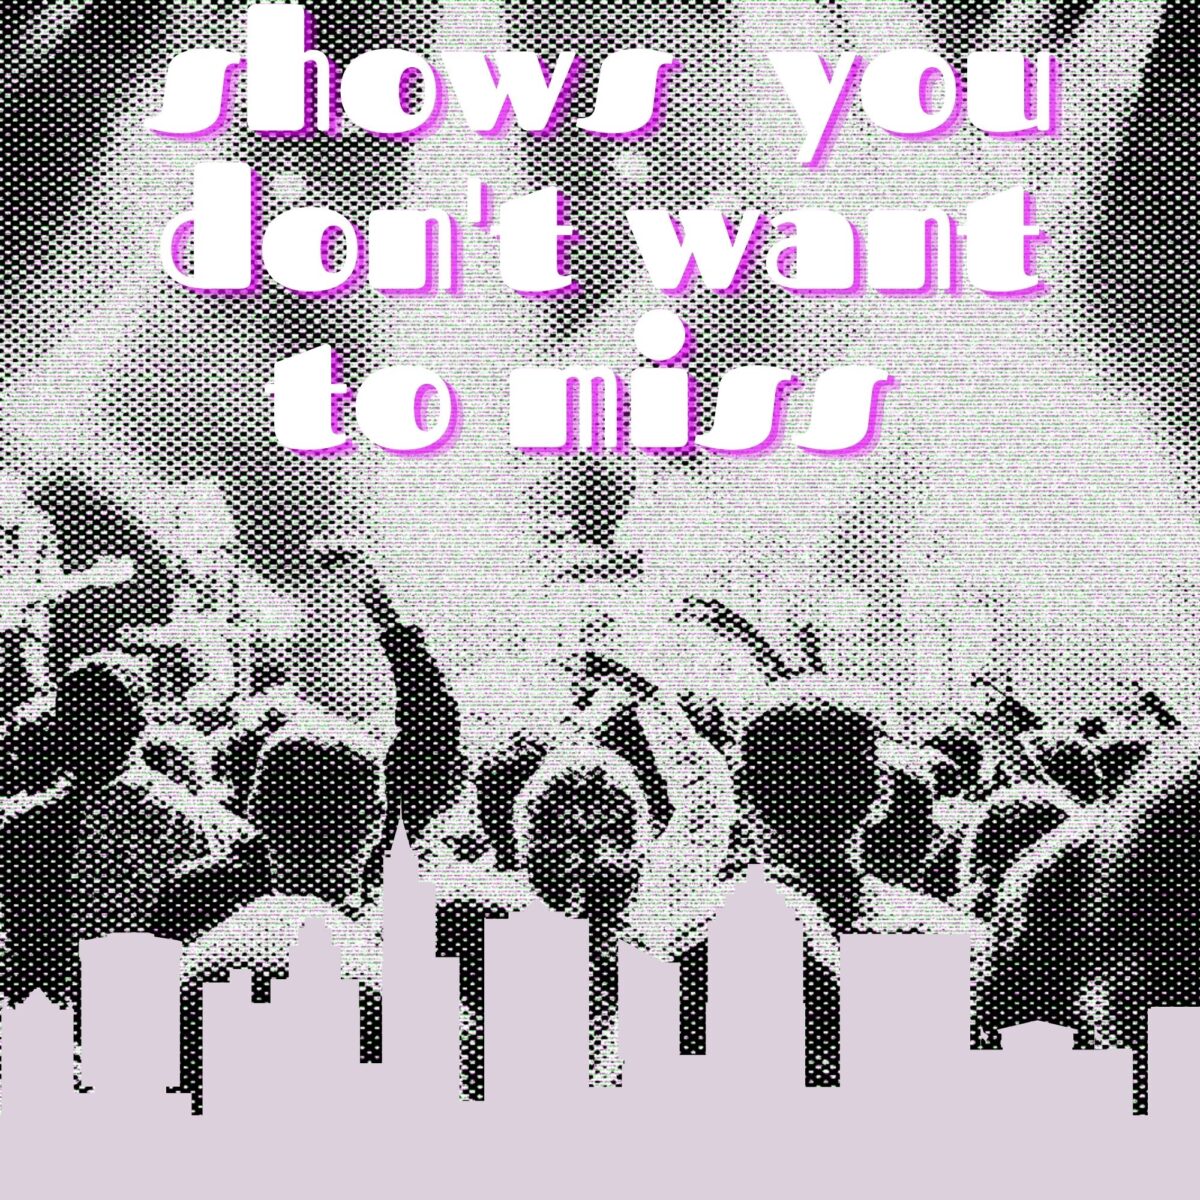 Black and white photo of a concert. The bottom has an outline of the Raleigh skyline colored in purple. Up top, text reads "shows you don't want to miss"